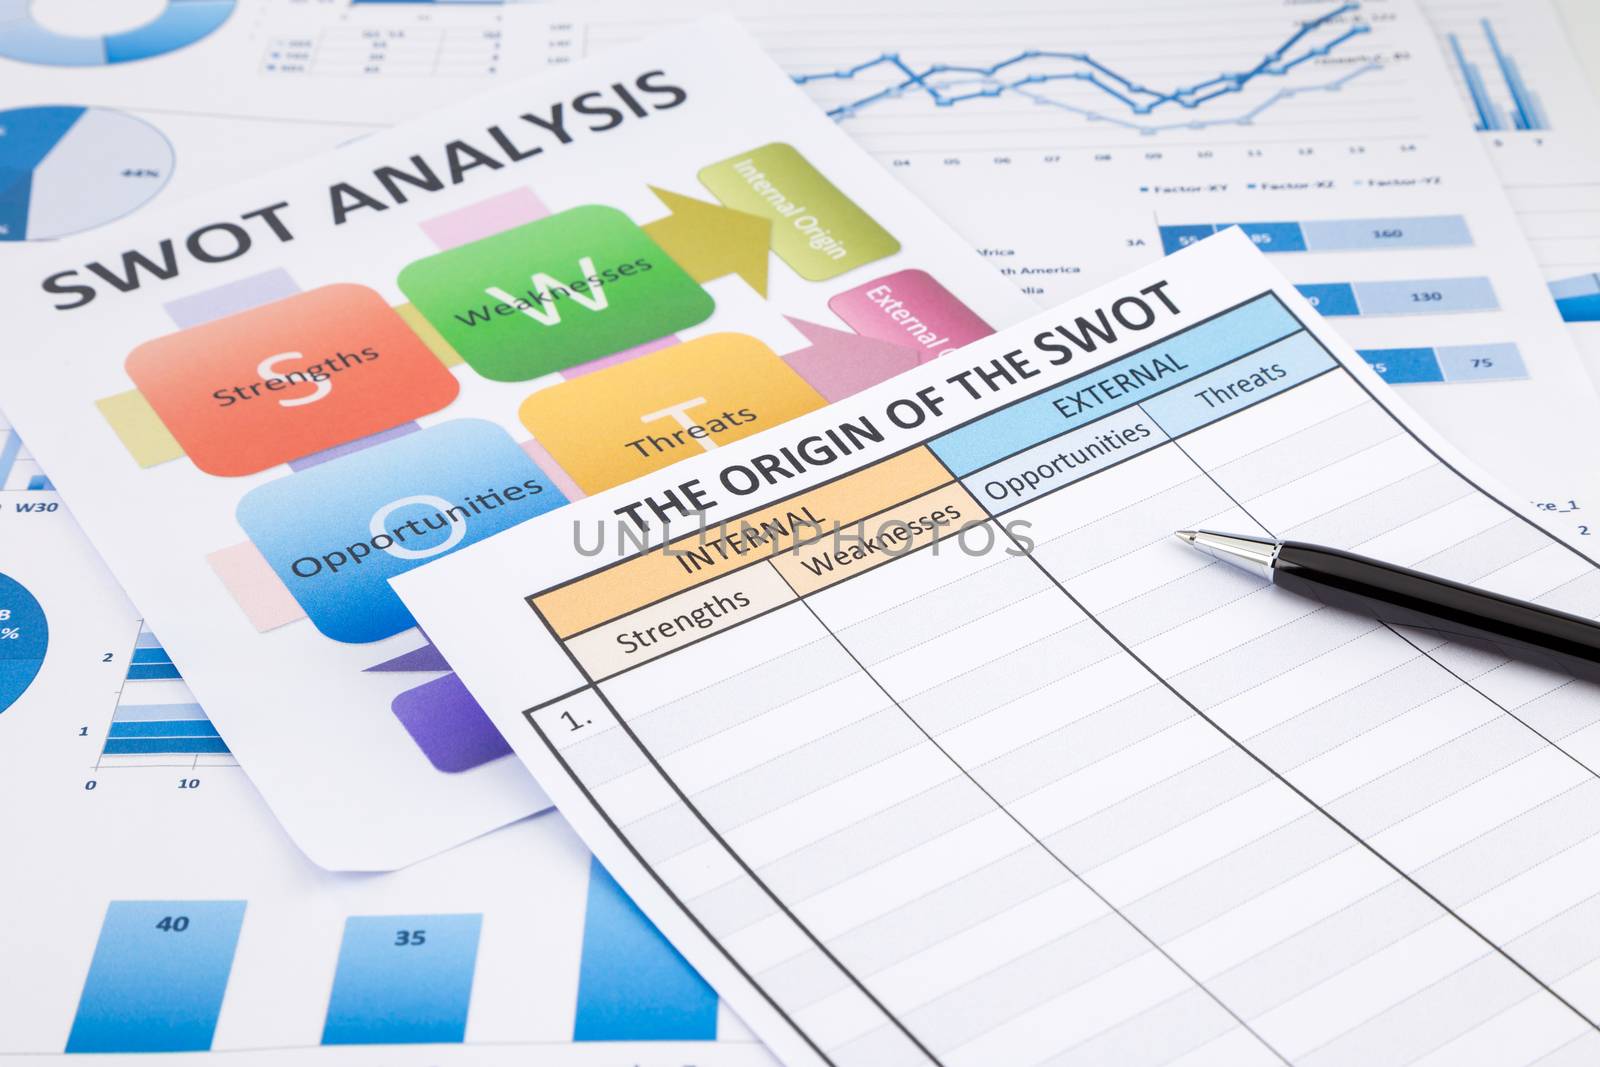 SWOT analysis document, flow chart and business graphs  by vinnstock